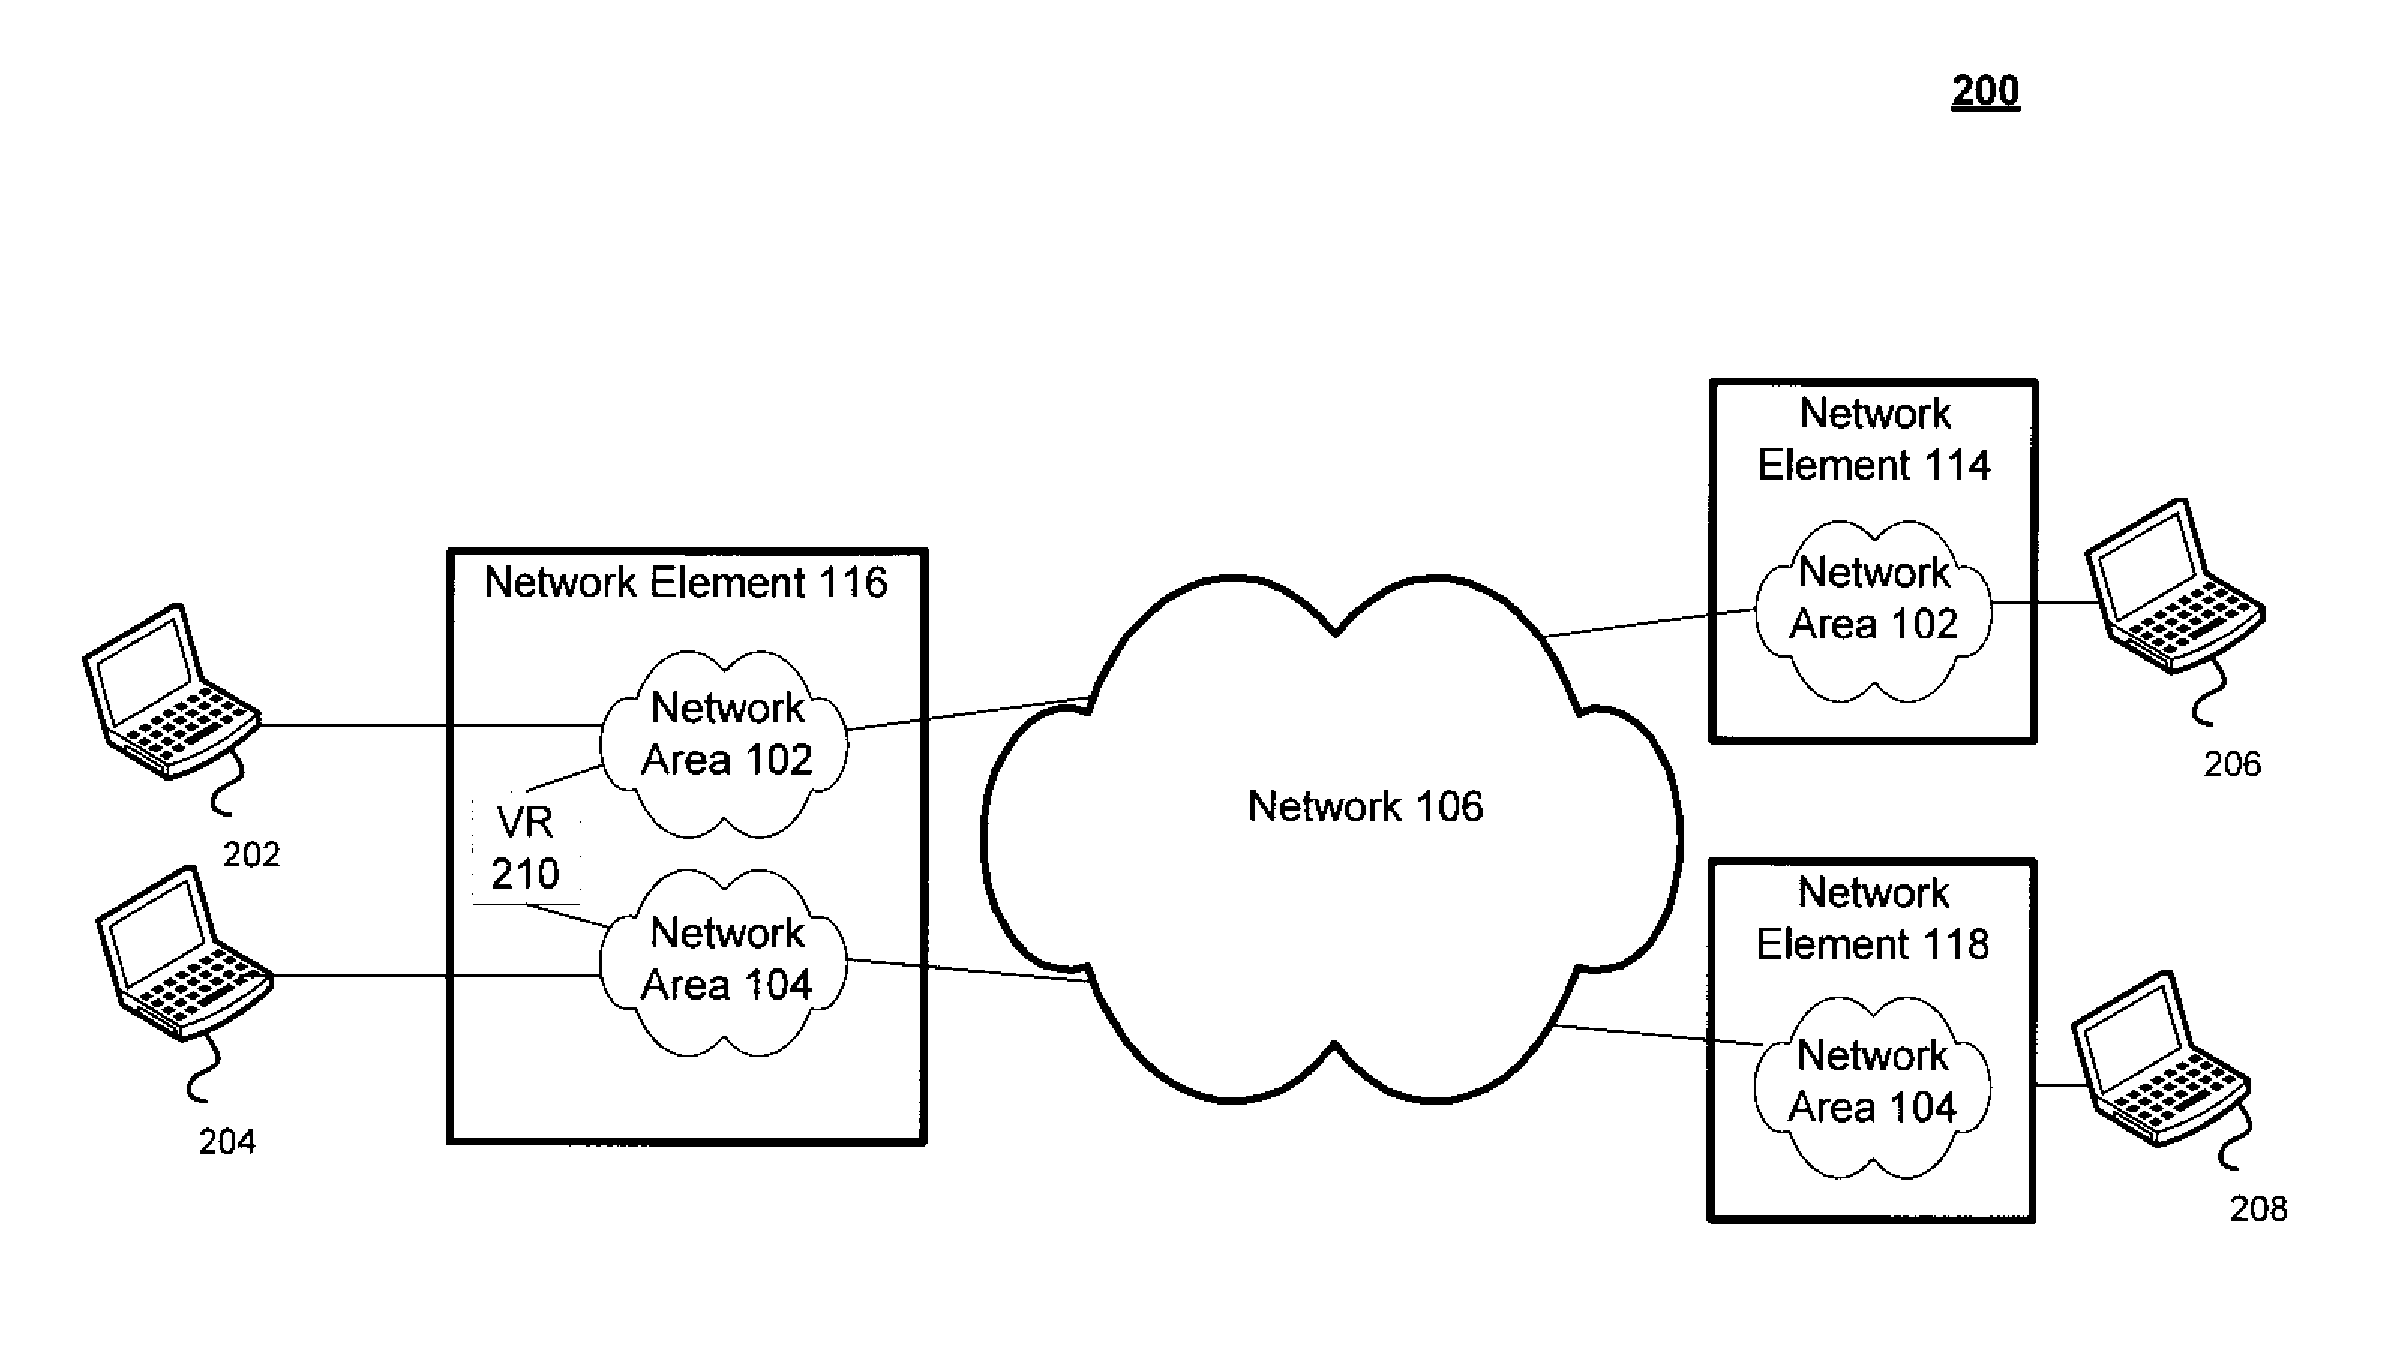 Techniques for routing data between network areas